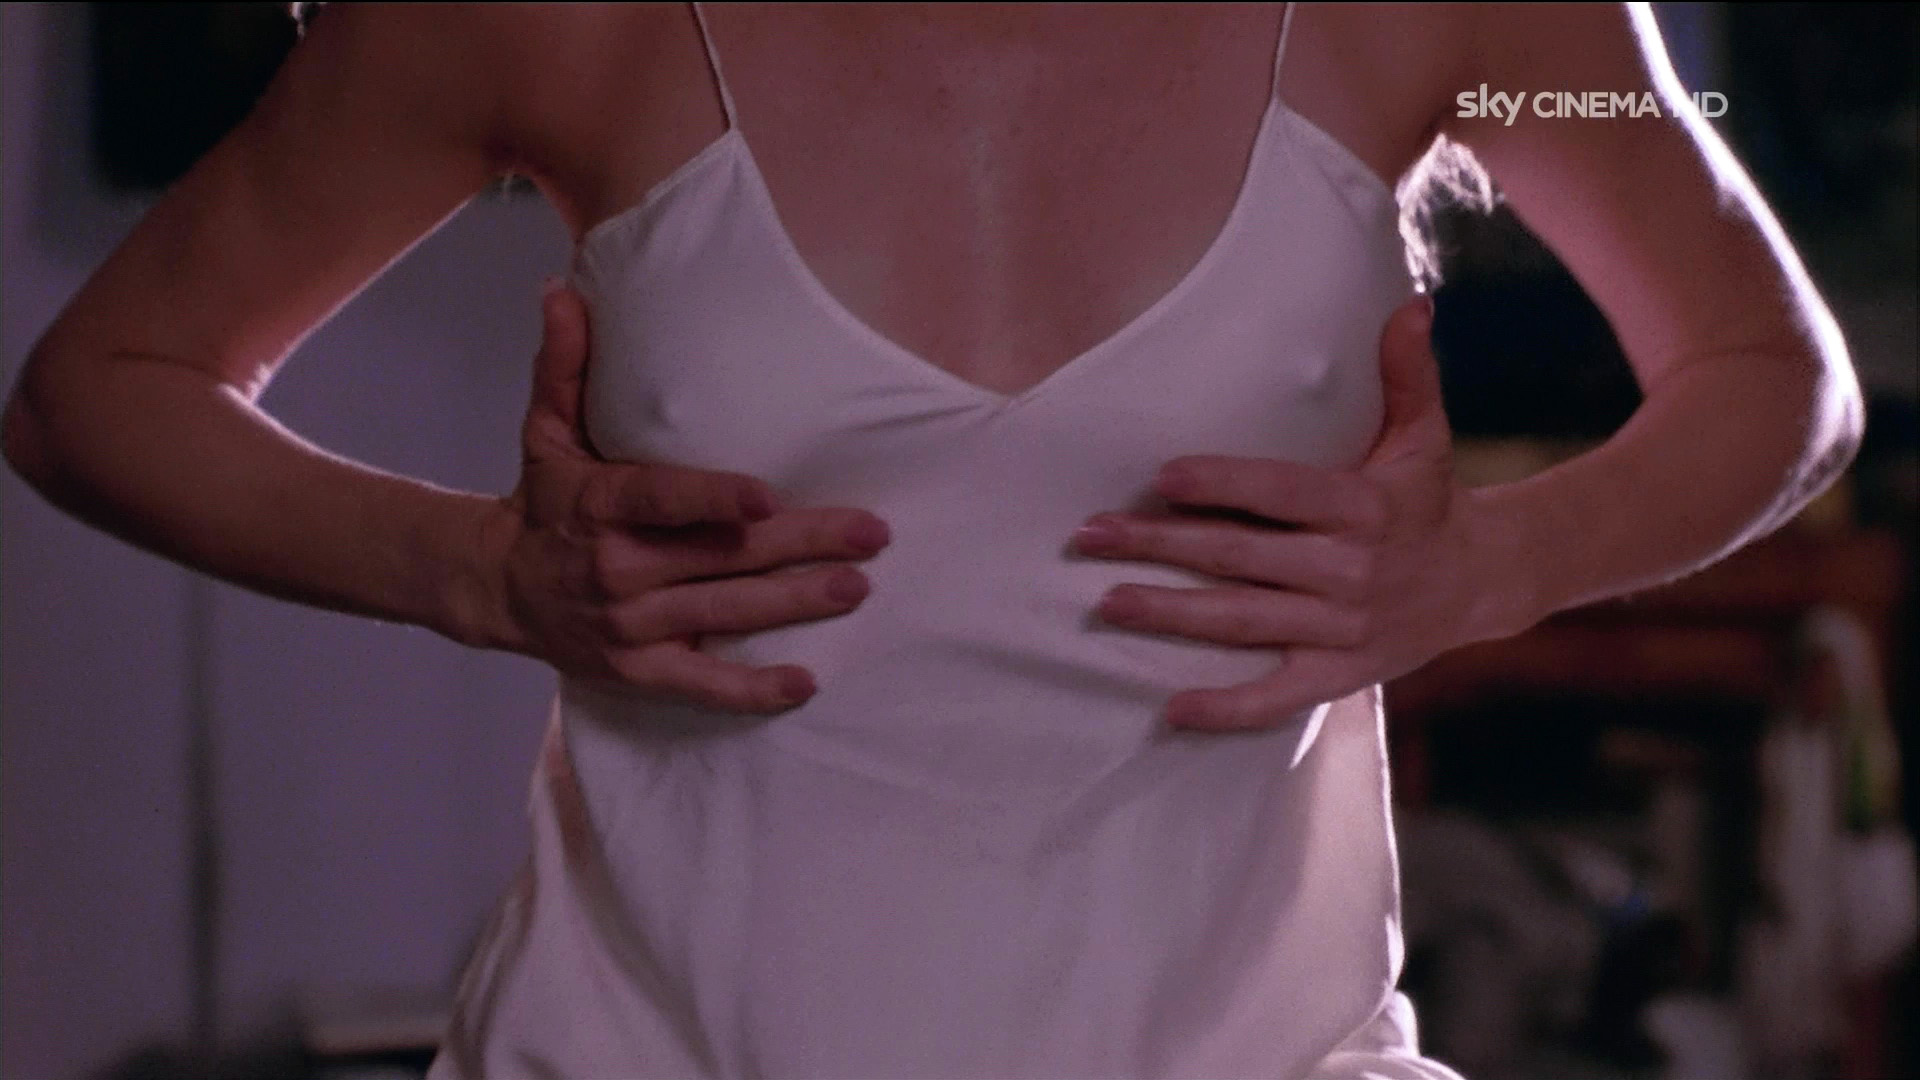 Naked Kim Basinger In My Stepmother Is An Alien